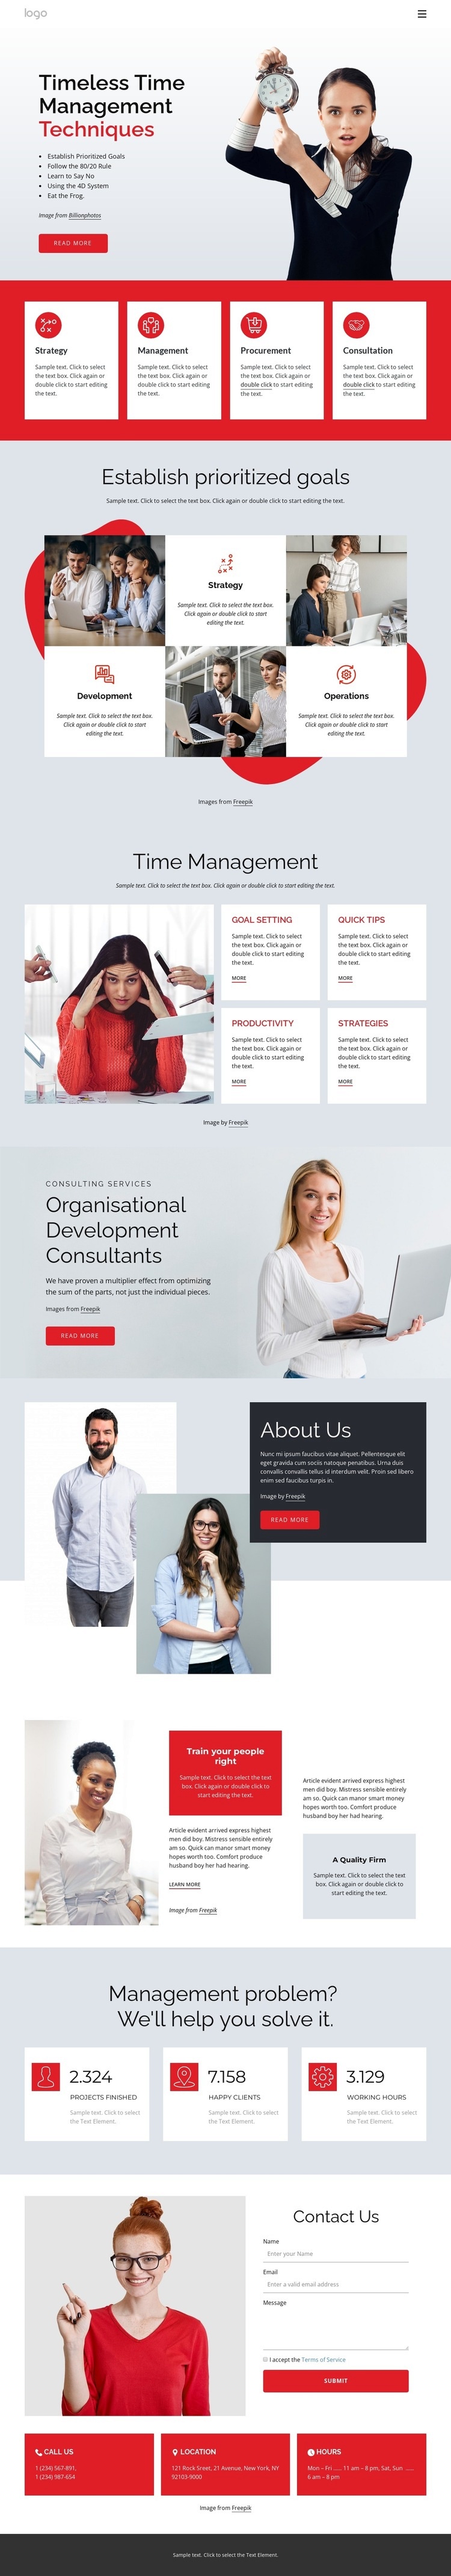 Time management company Homepage Design